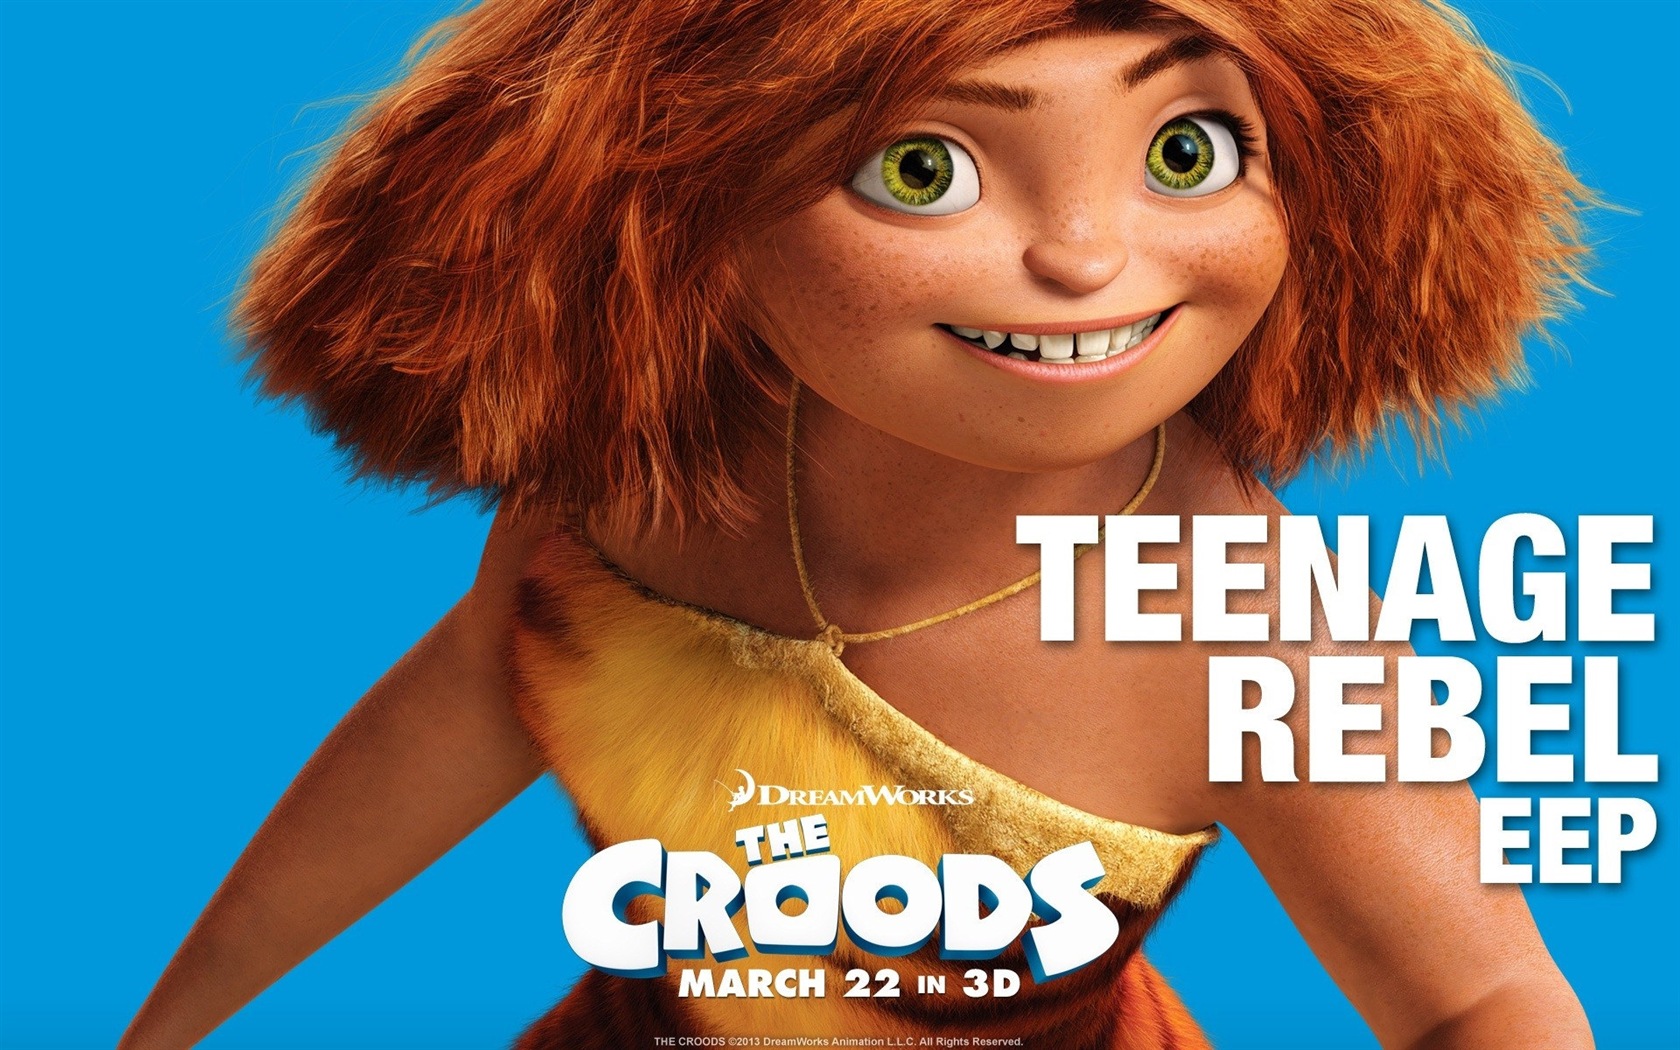 The Croods HD movie wallpapers #10 - 1680x1050